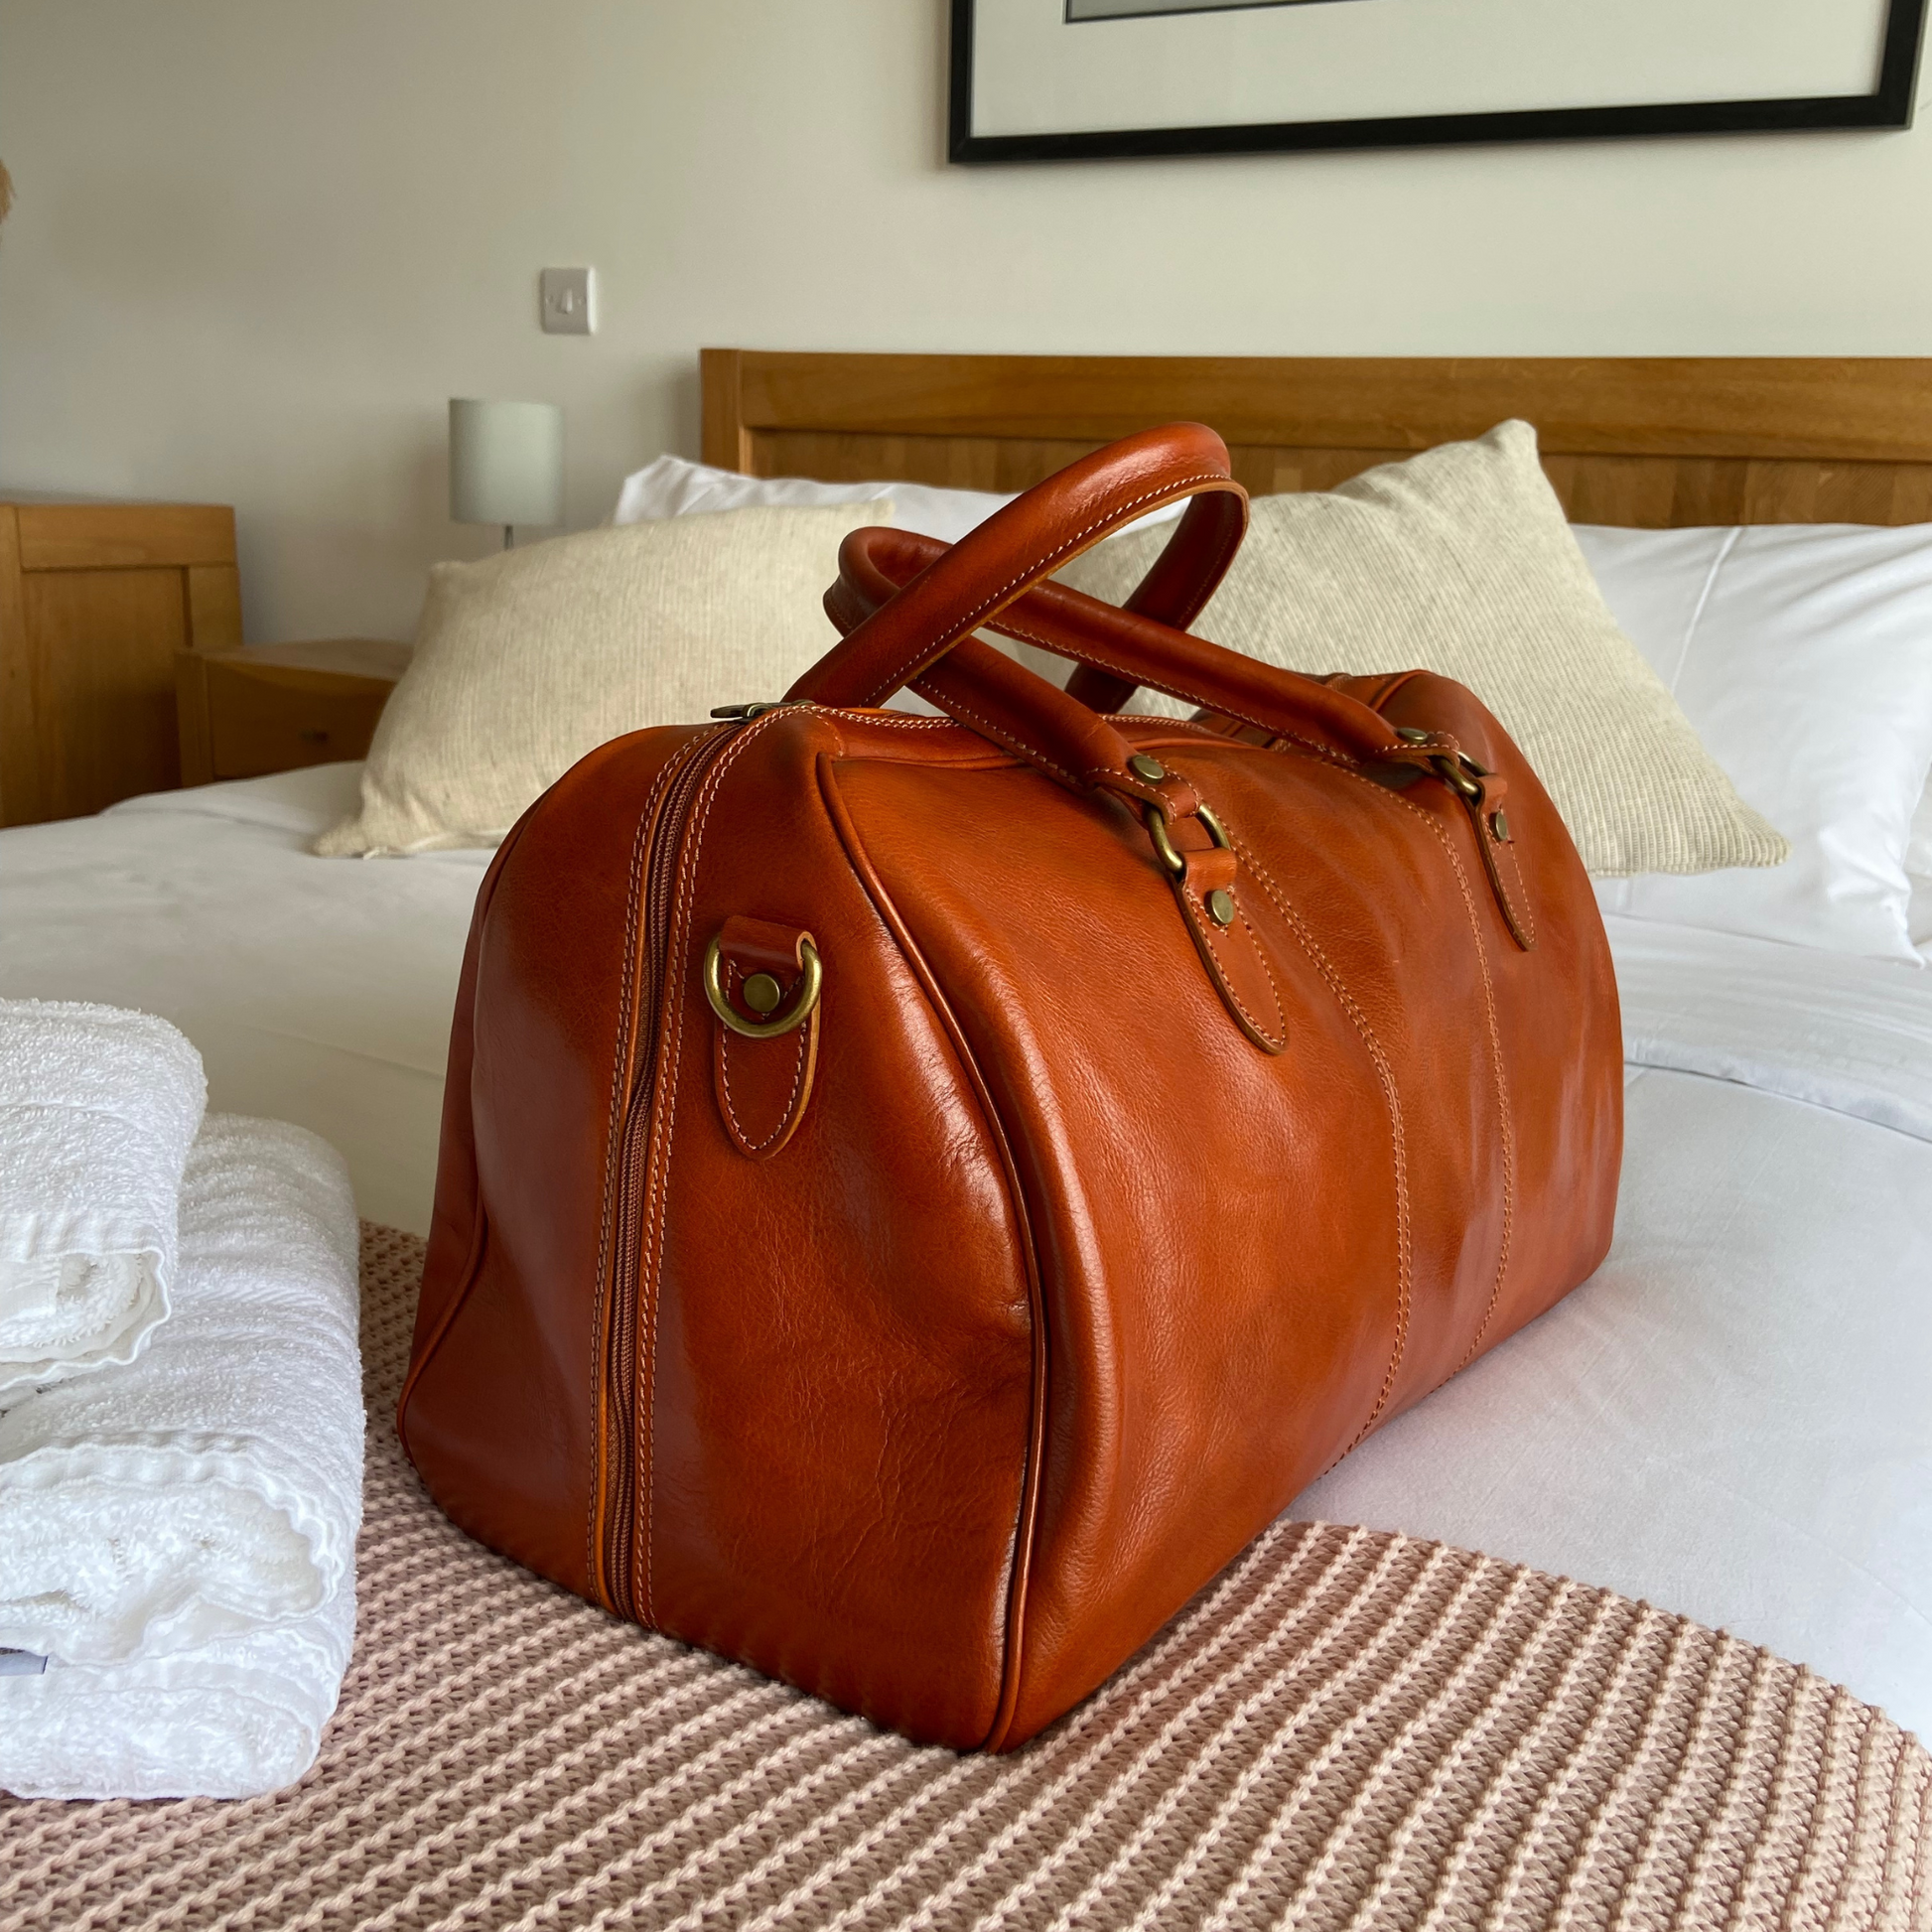 leather holdall on bed